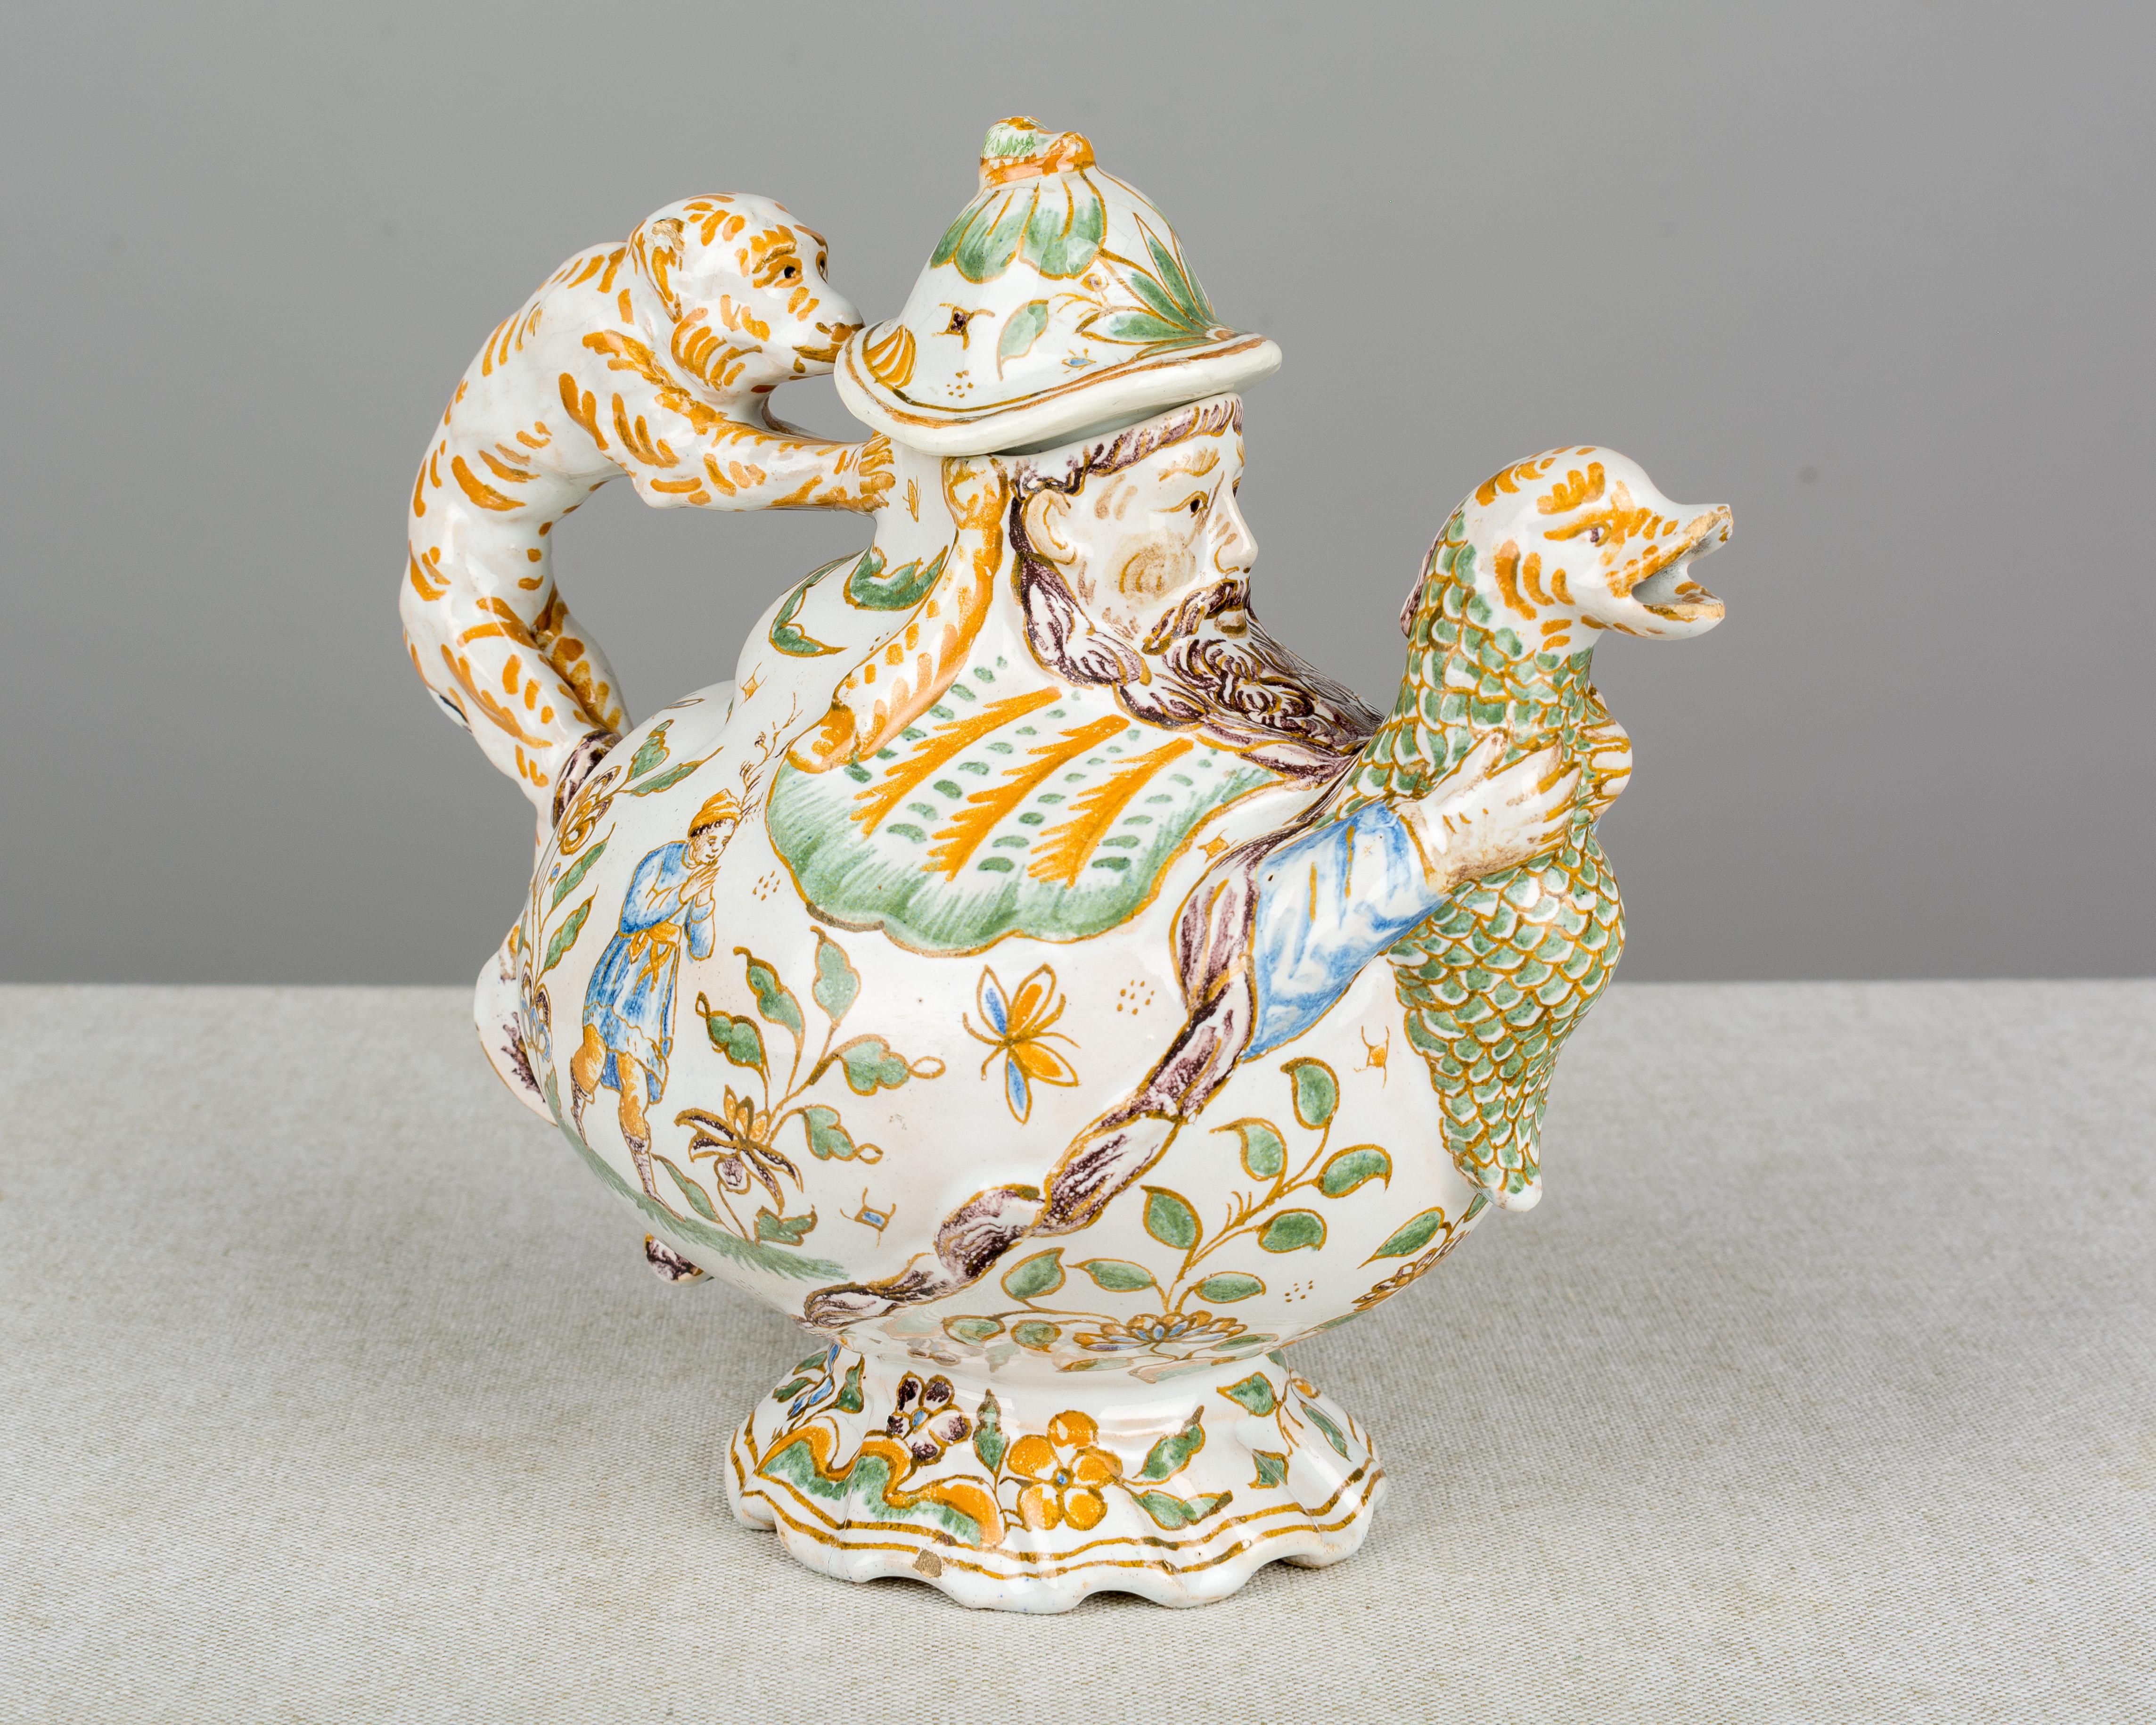 A whimsical 18th century French Moustiers faience teapot with monkey handle and dolphin spout. Delicate hand painted figural and floral decoration in the traditional colors of mustard yellow, green and blue. From the workshop of Olérys-Laugier with